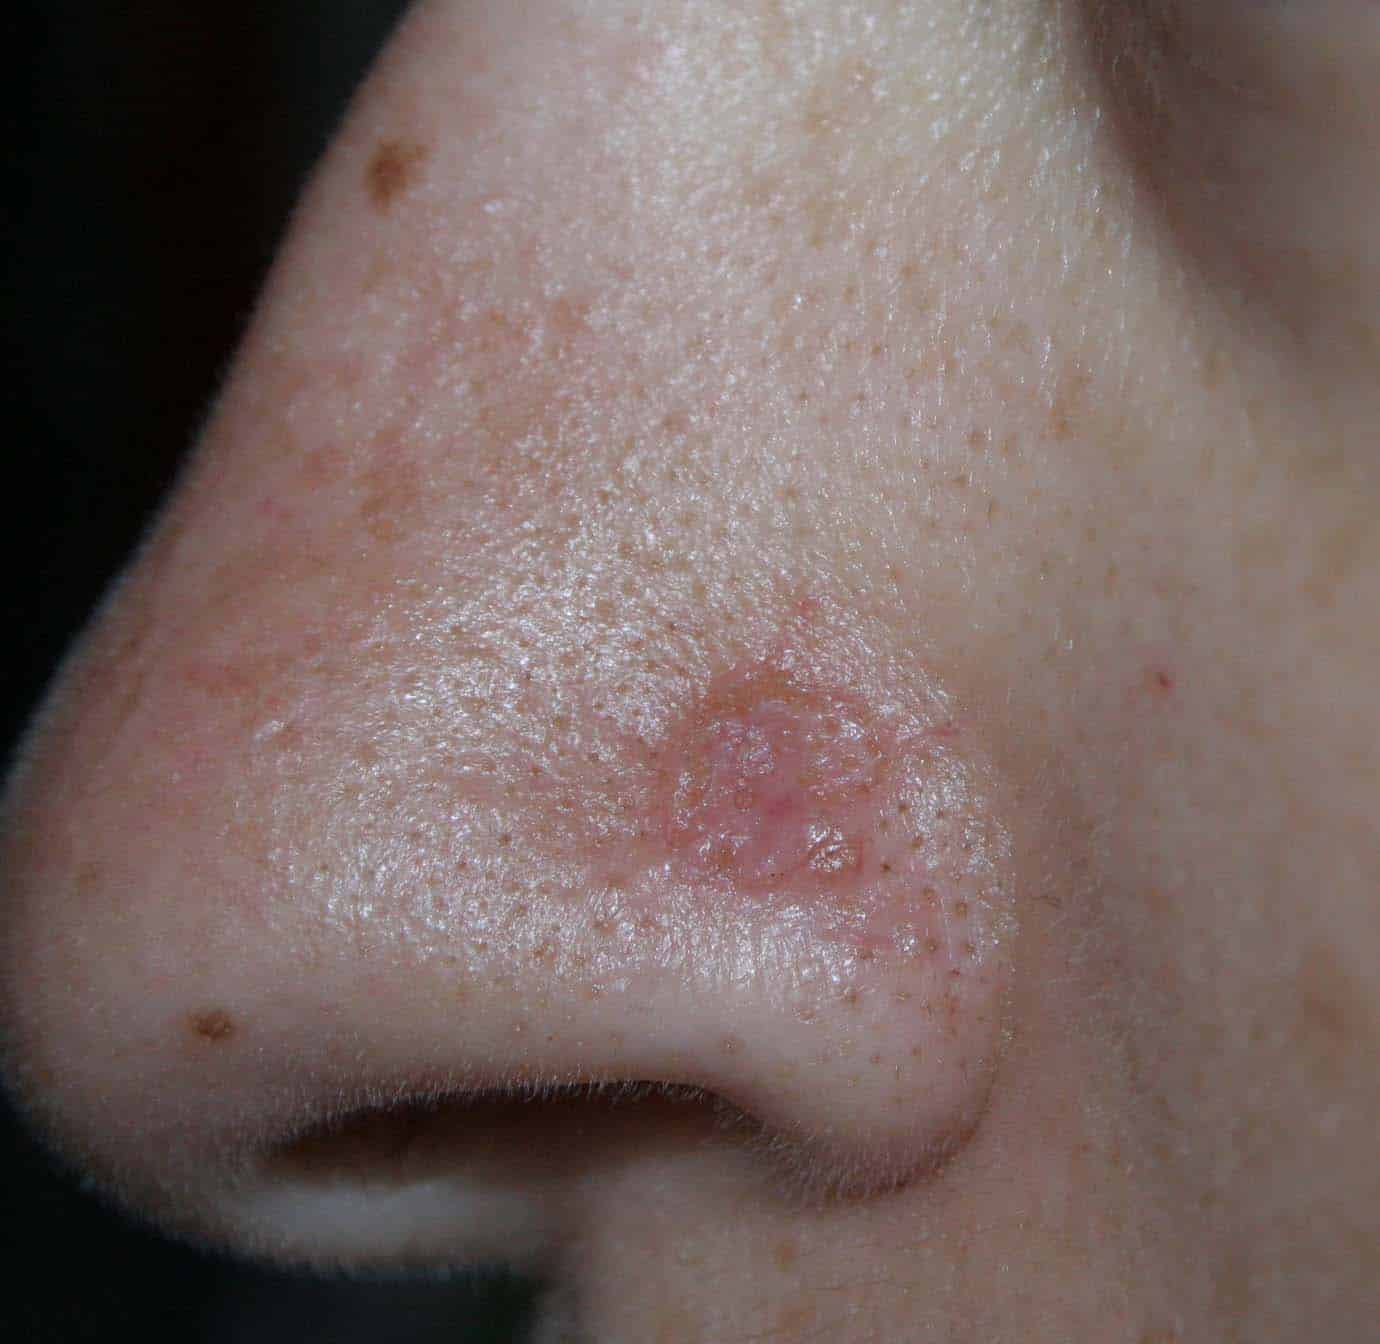 Hi, I got this sore on my nose about 8 years ago, perfectly